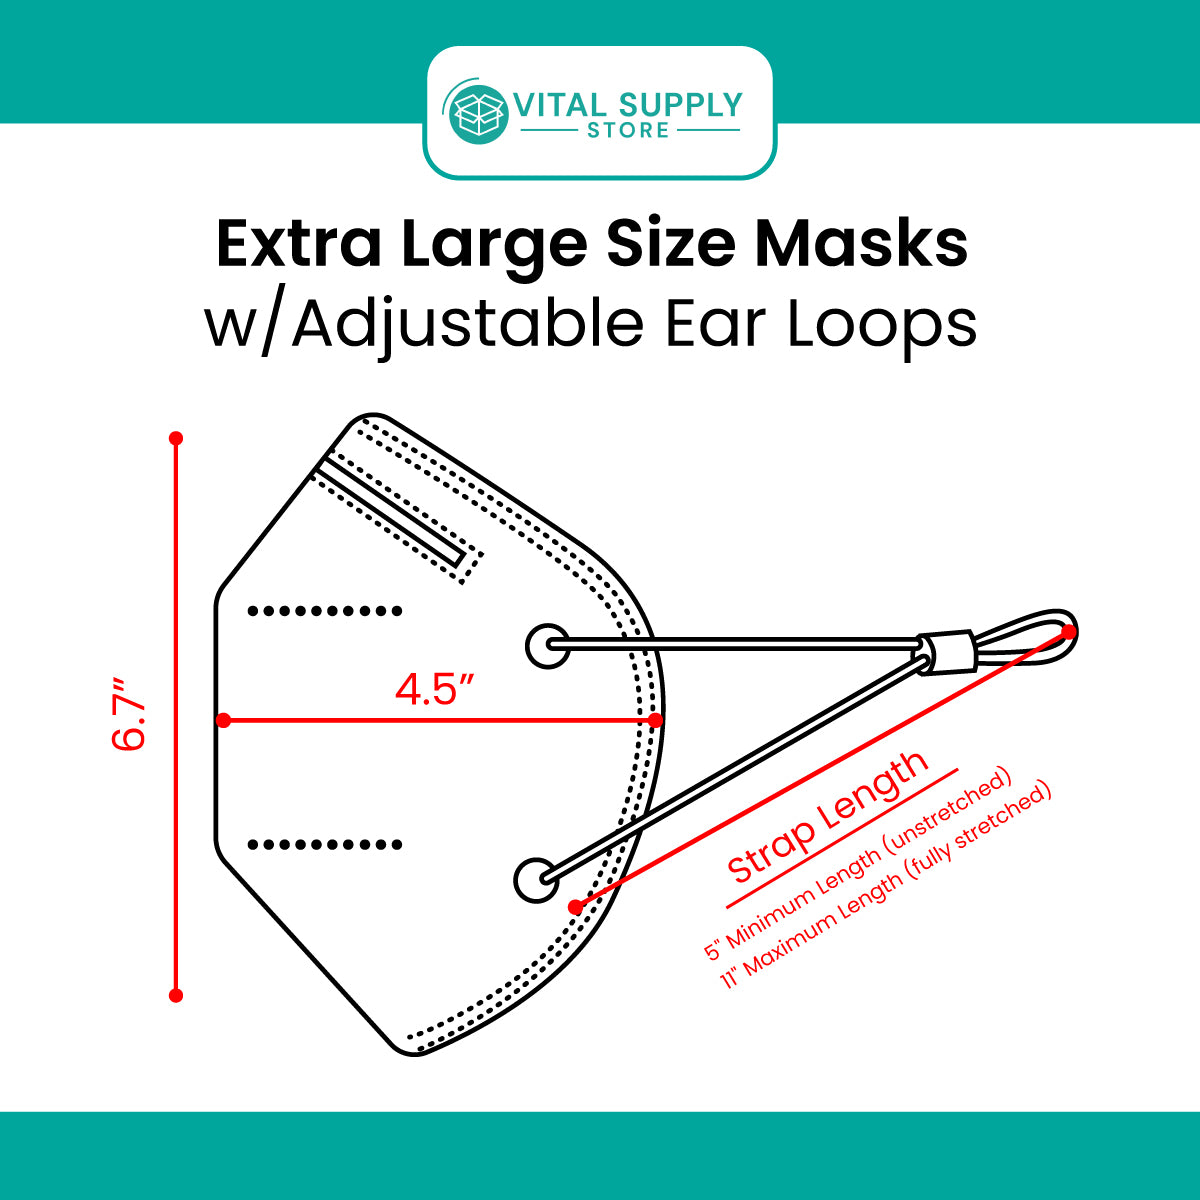 Kn95 Masks In Sizes From Extra Large to Small - 5 Size Options